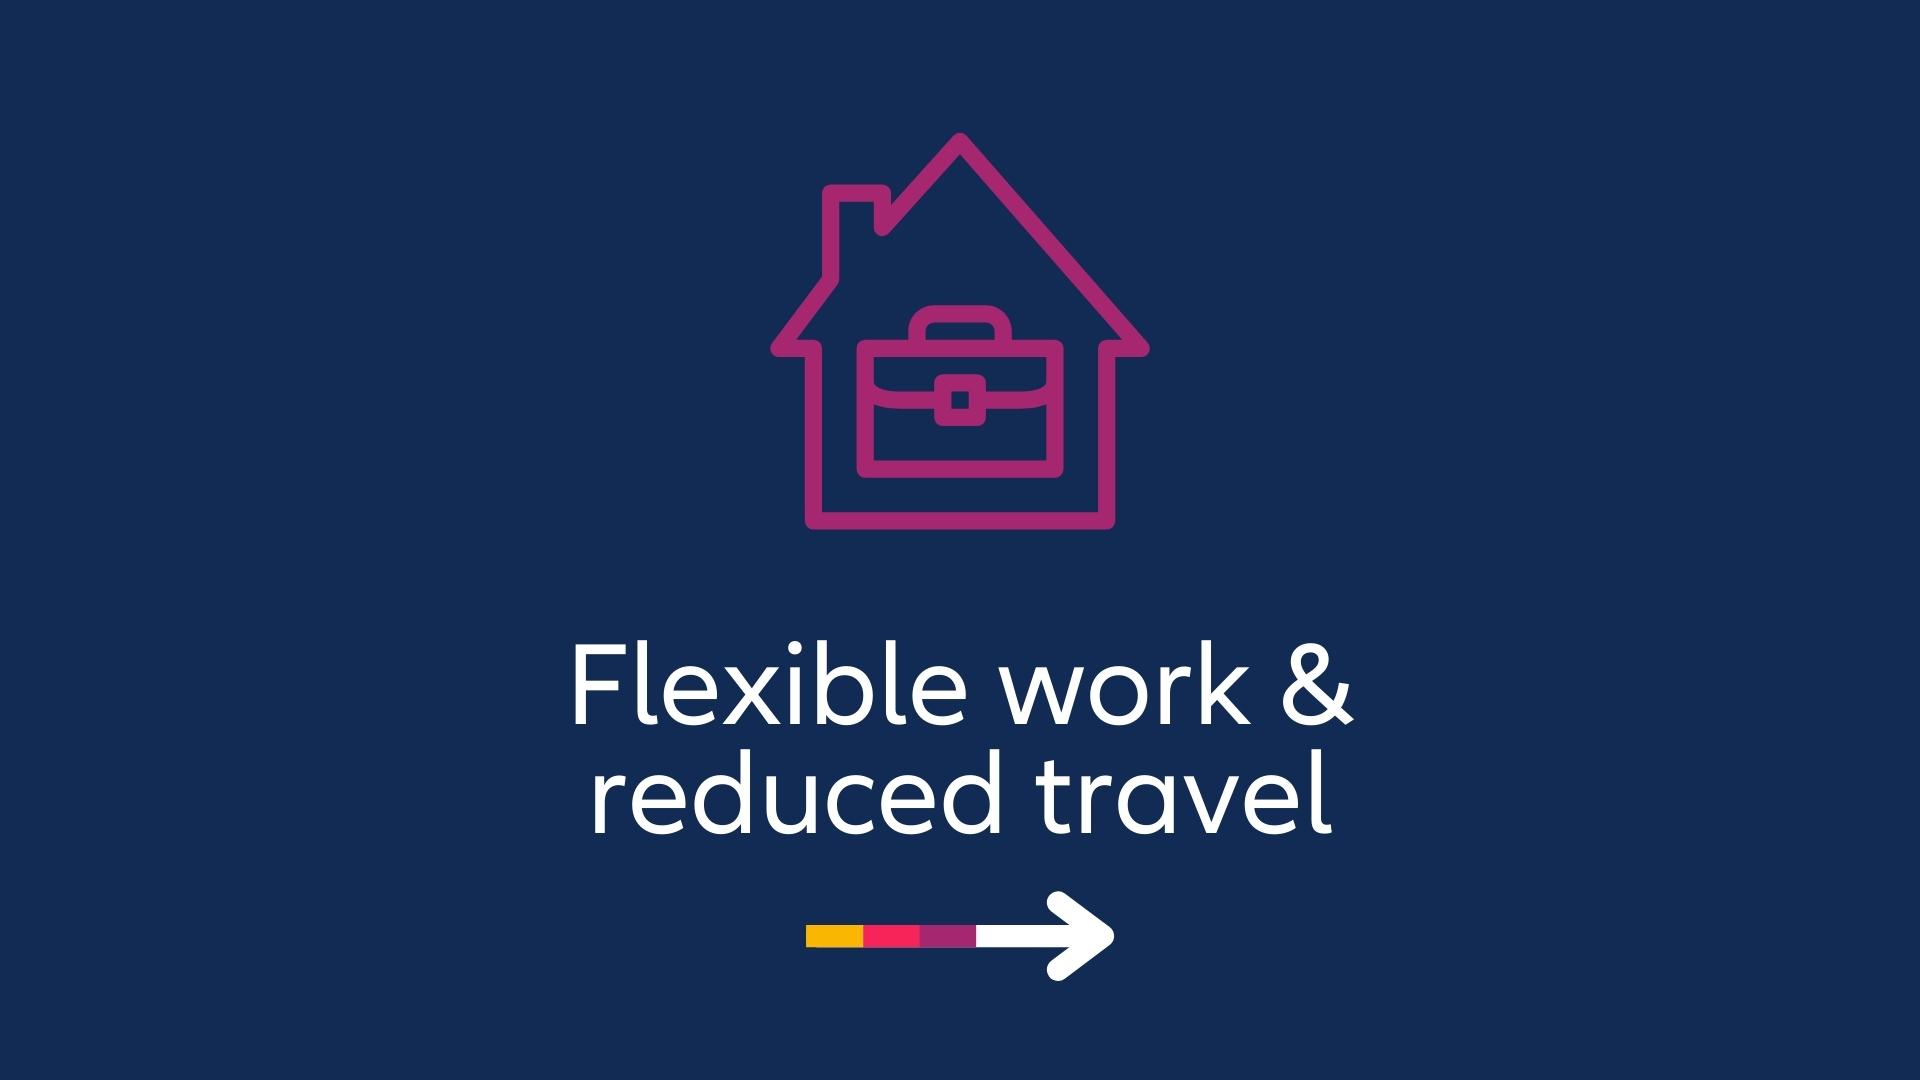 Flexible work and reduced travel, homeoffice icon